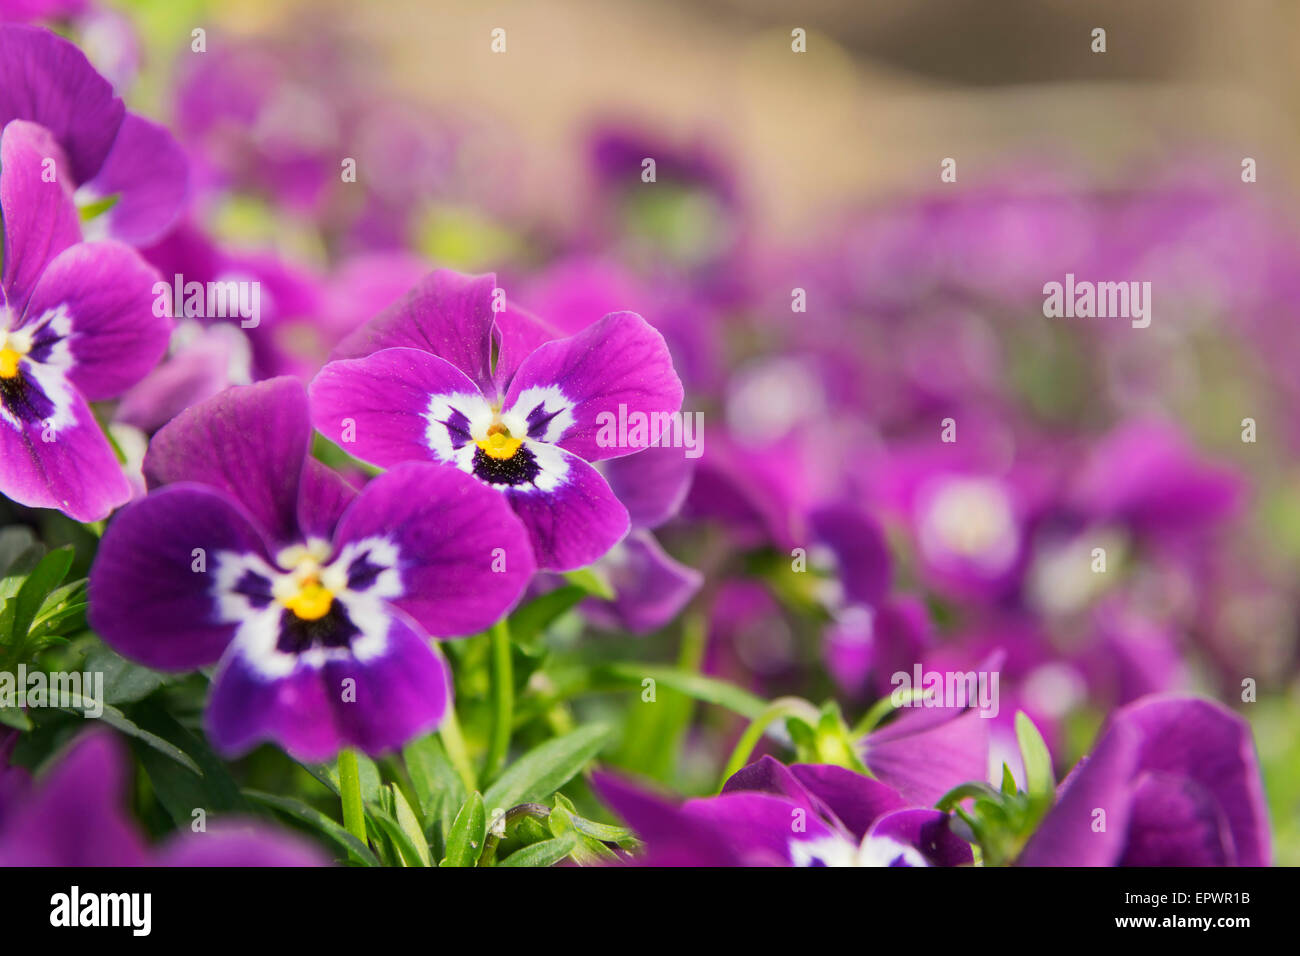 Image of several pansies in a flower bed Stock Photo